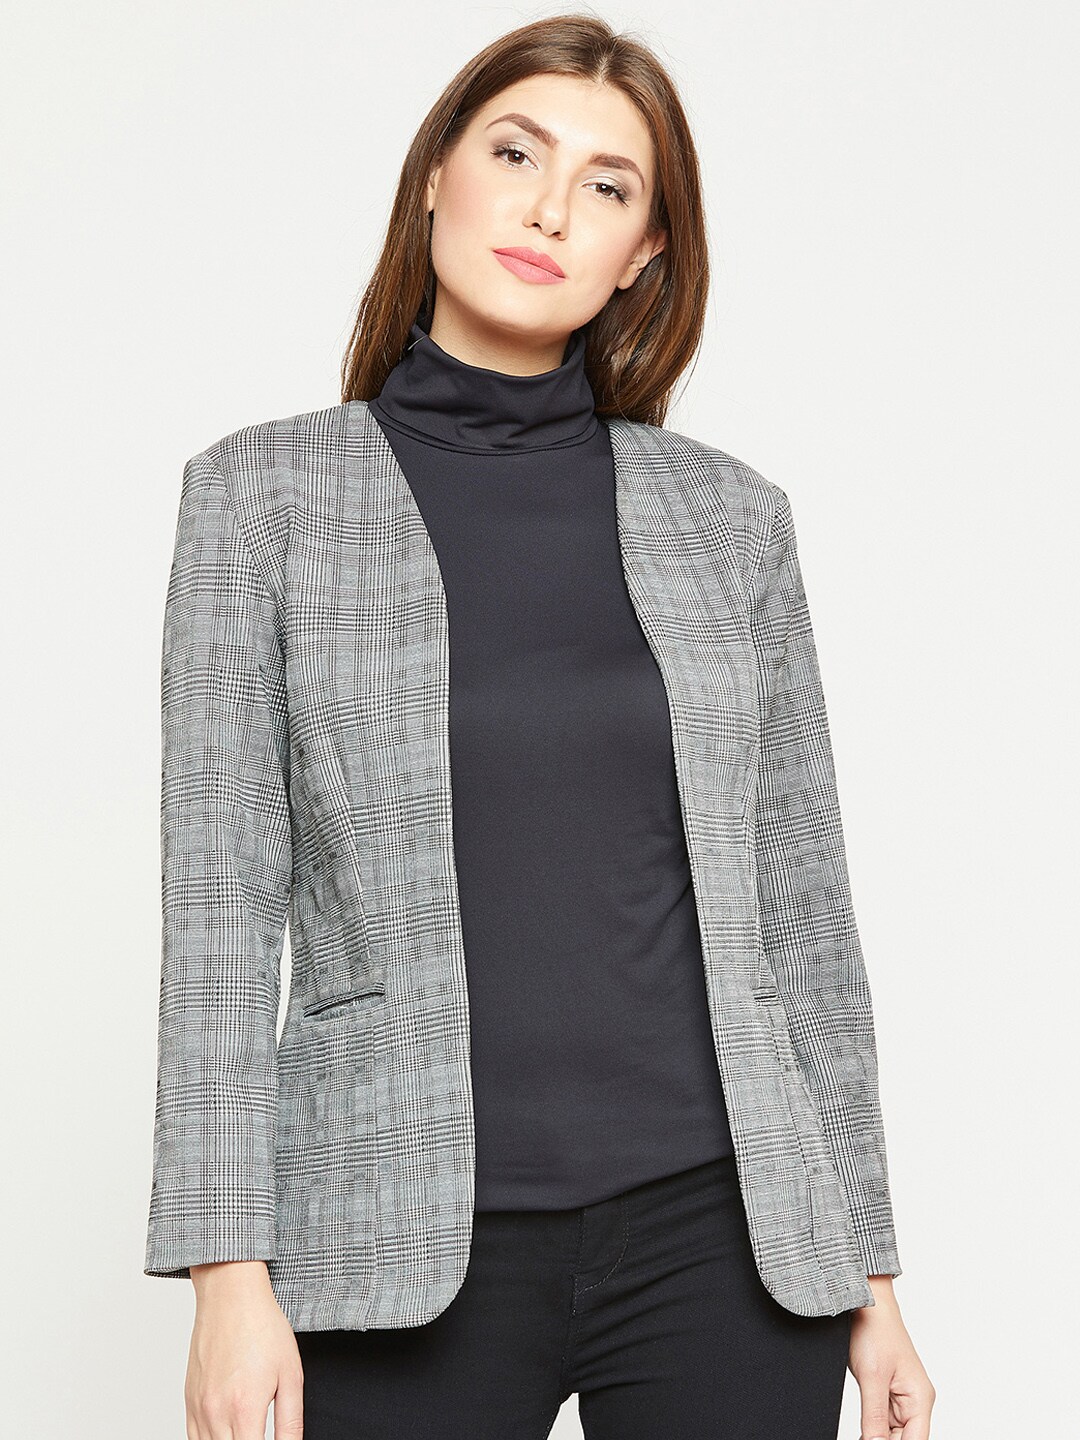 Marie Claire Women Grey Checked Blazer Price in India